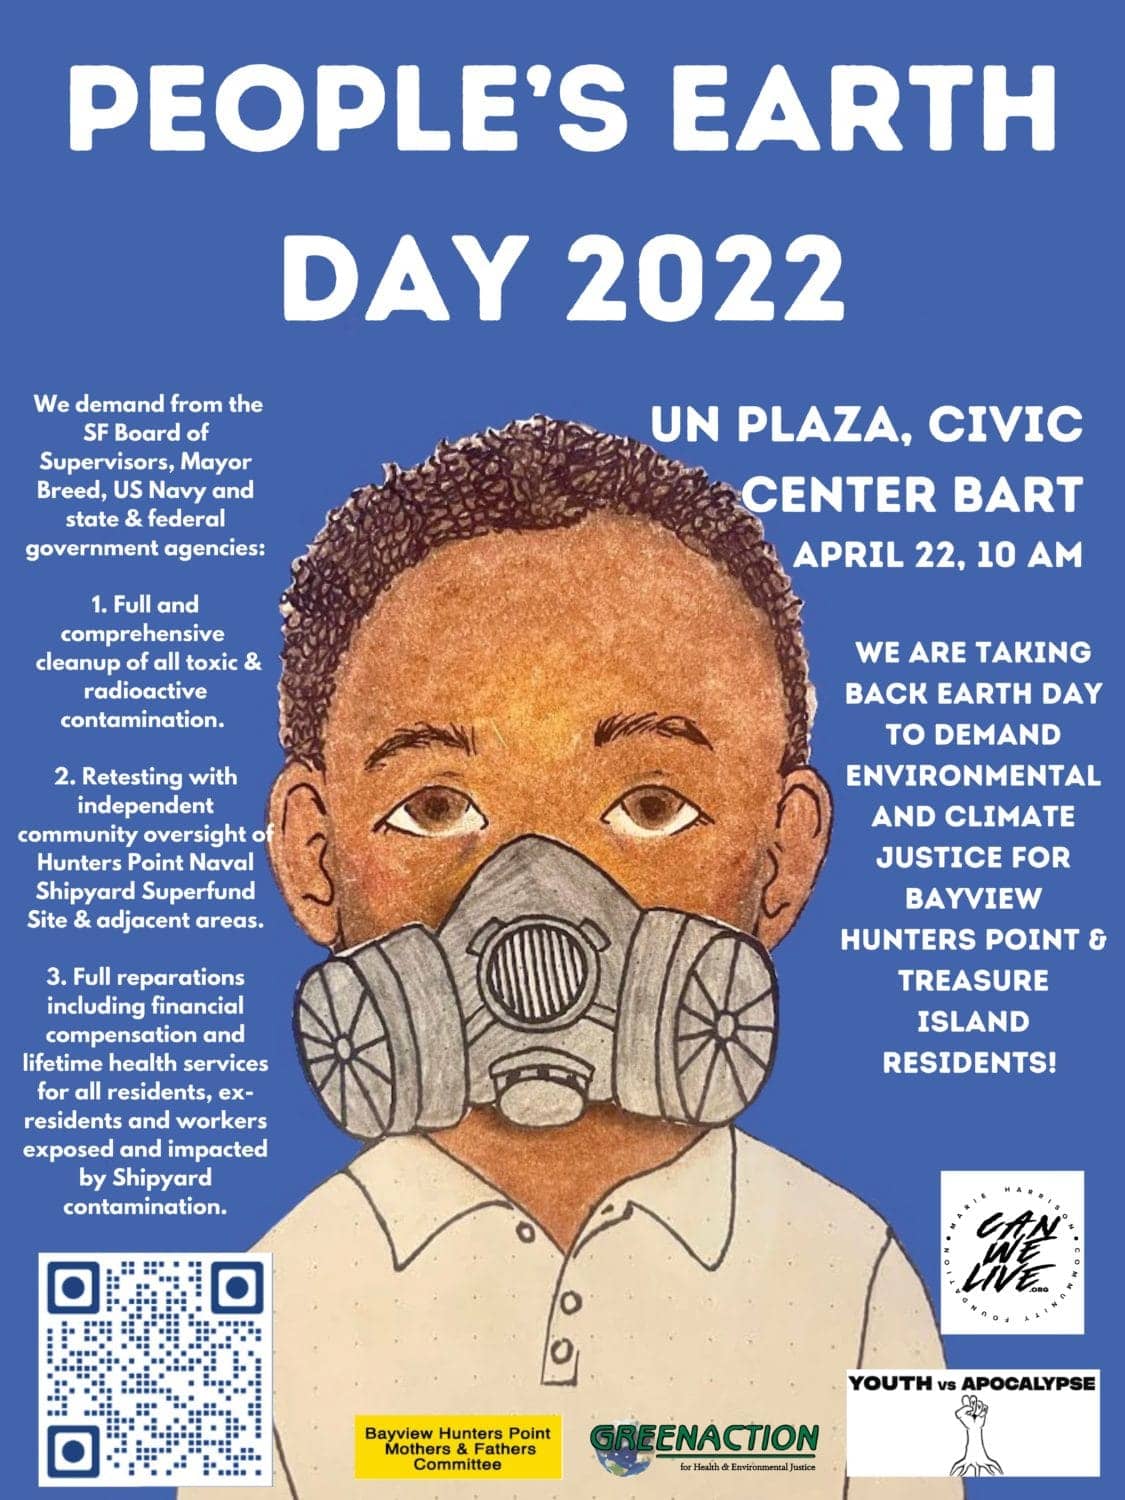 Peoples-Earth-Day-flier-042222-1, Youth climate strike on People’s Earth Day April 22, 2022, Culture Currents News & Views 